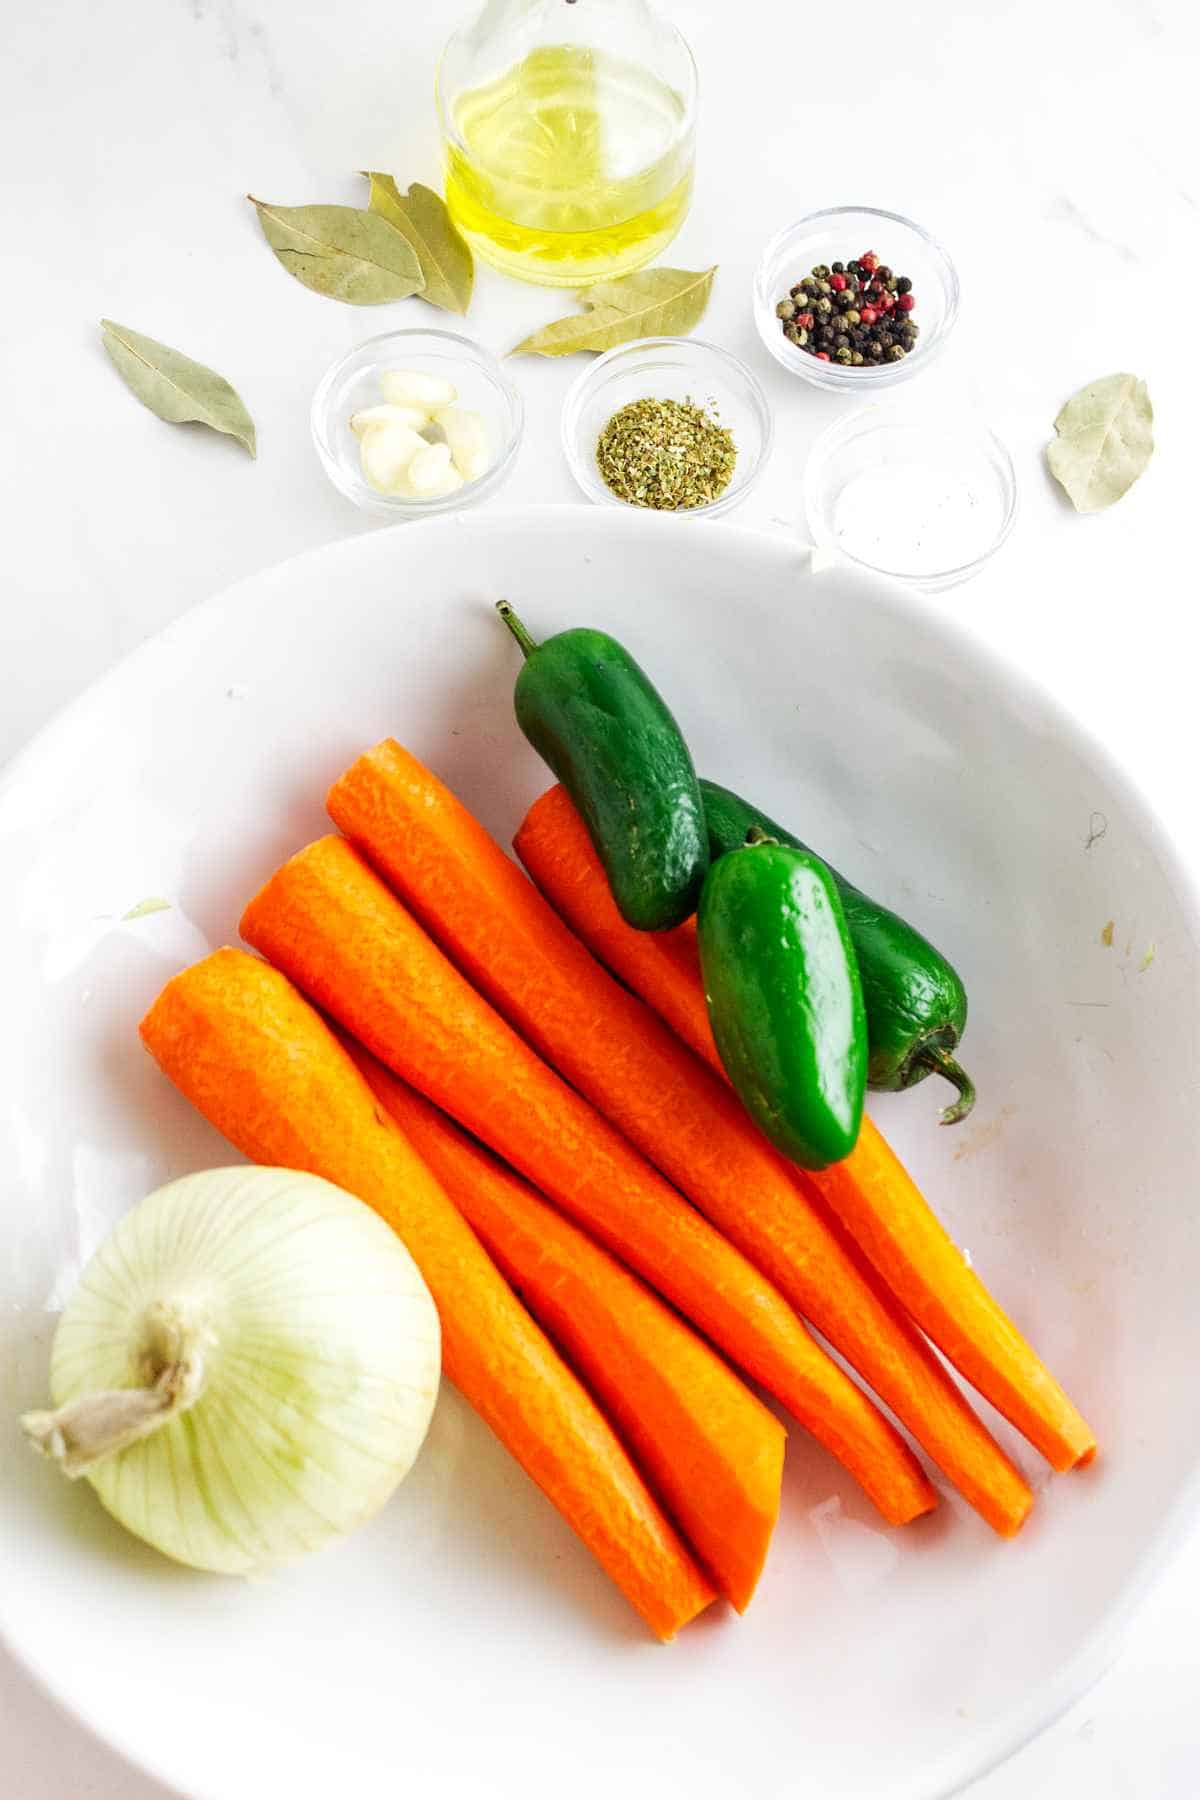 carrots, onion, spics, and jalapeno pepper on a white background.